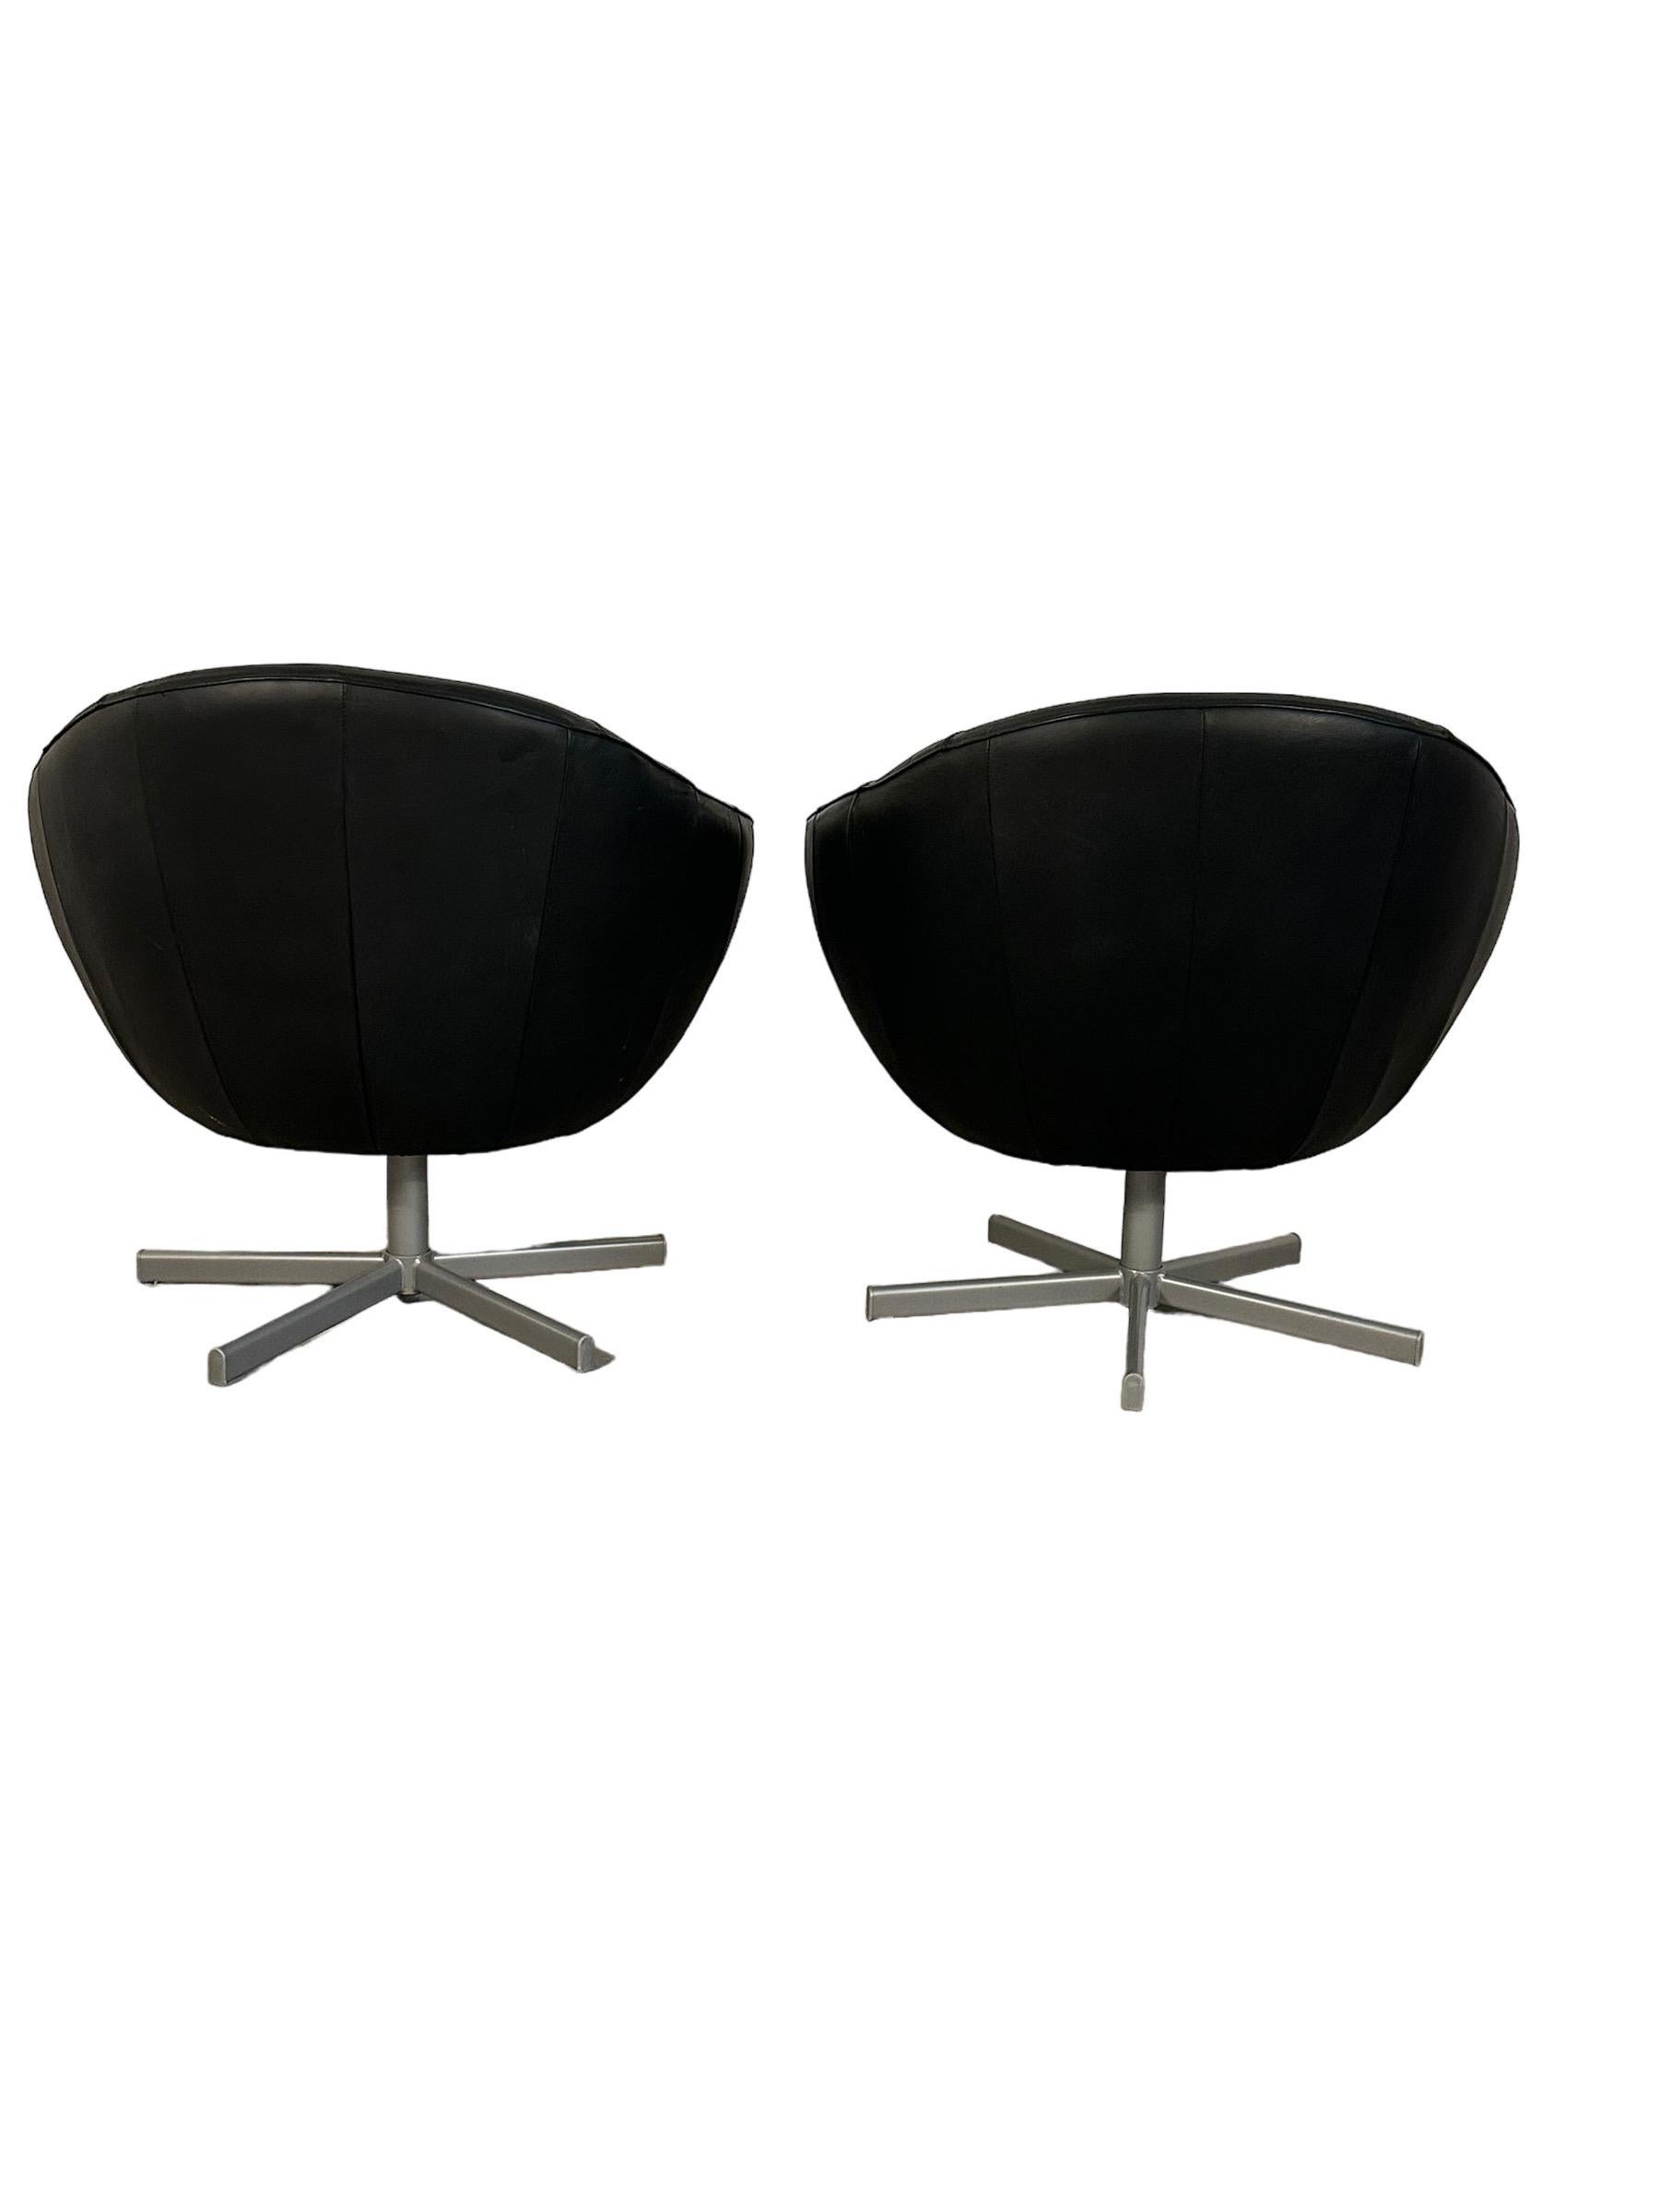 20th Century Pair Mid Century Modern Swiveling Leather Pod Chairs For Sale